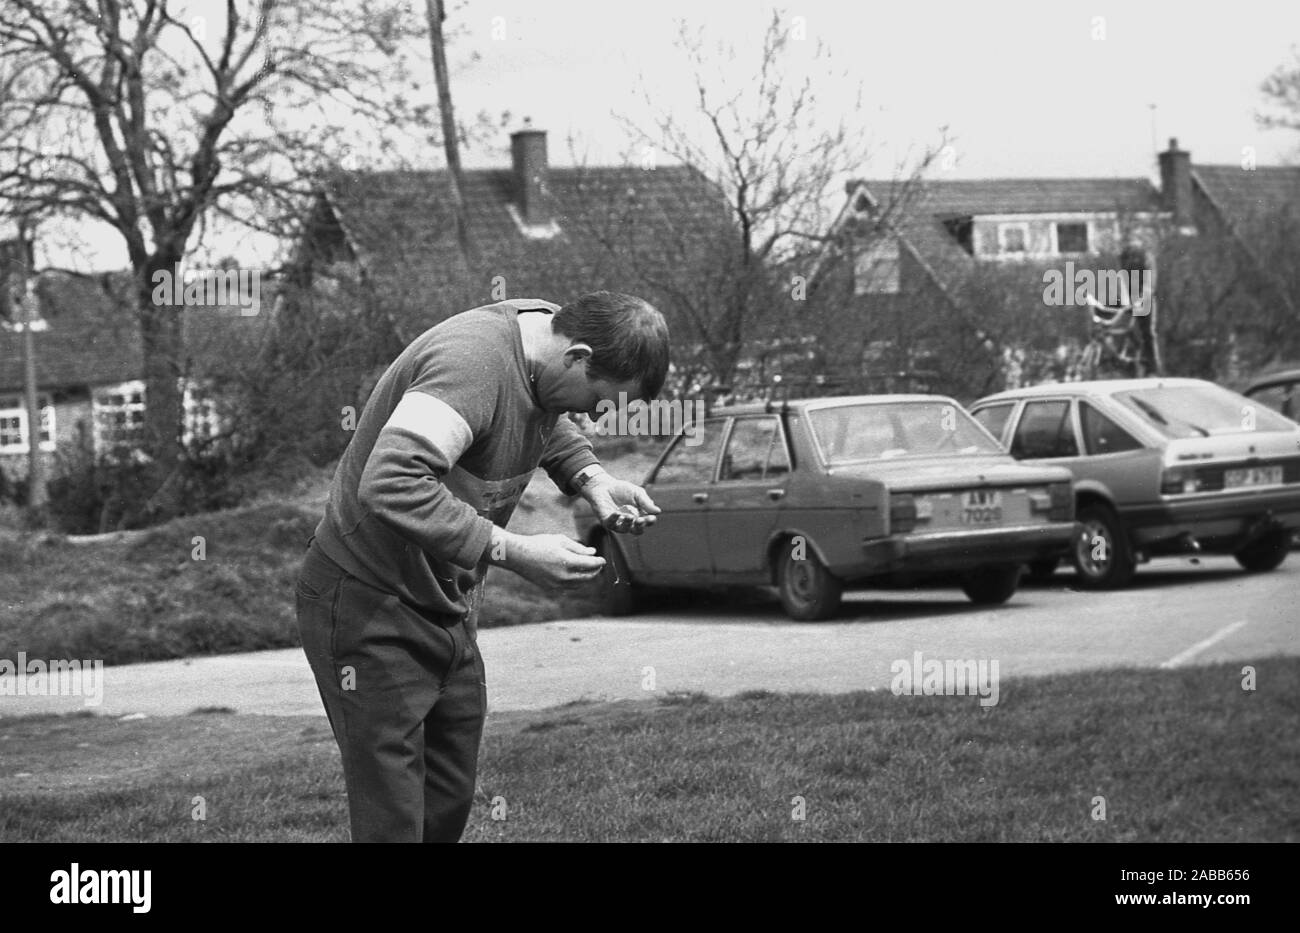 1980s, historical, a man taking part in a traditional egg throwing competition gets a splattering when the egg he has just caught breaks open over his clothes, England, UK. Egg throwing is a two person sport requiring distance lobbing and the ability to catch the delicate object. Each team member begins by standing ten metres apart, spreading out after each successful catch. But....drop or break the egg and you are out!  It is believed that egg throwing first occurred in the 1300s, gradually becoming an informal sport called the 'egg toss', played at country fairs and fetes. Stock Photo